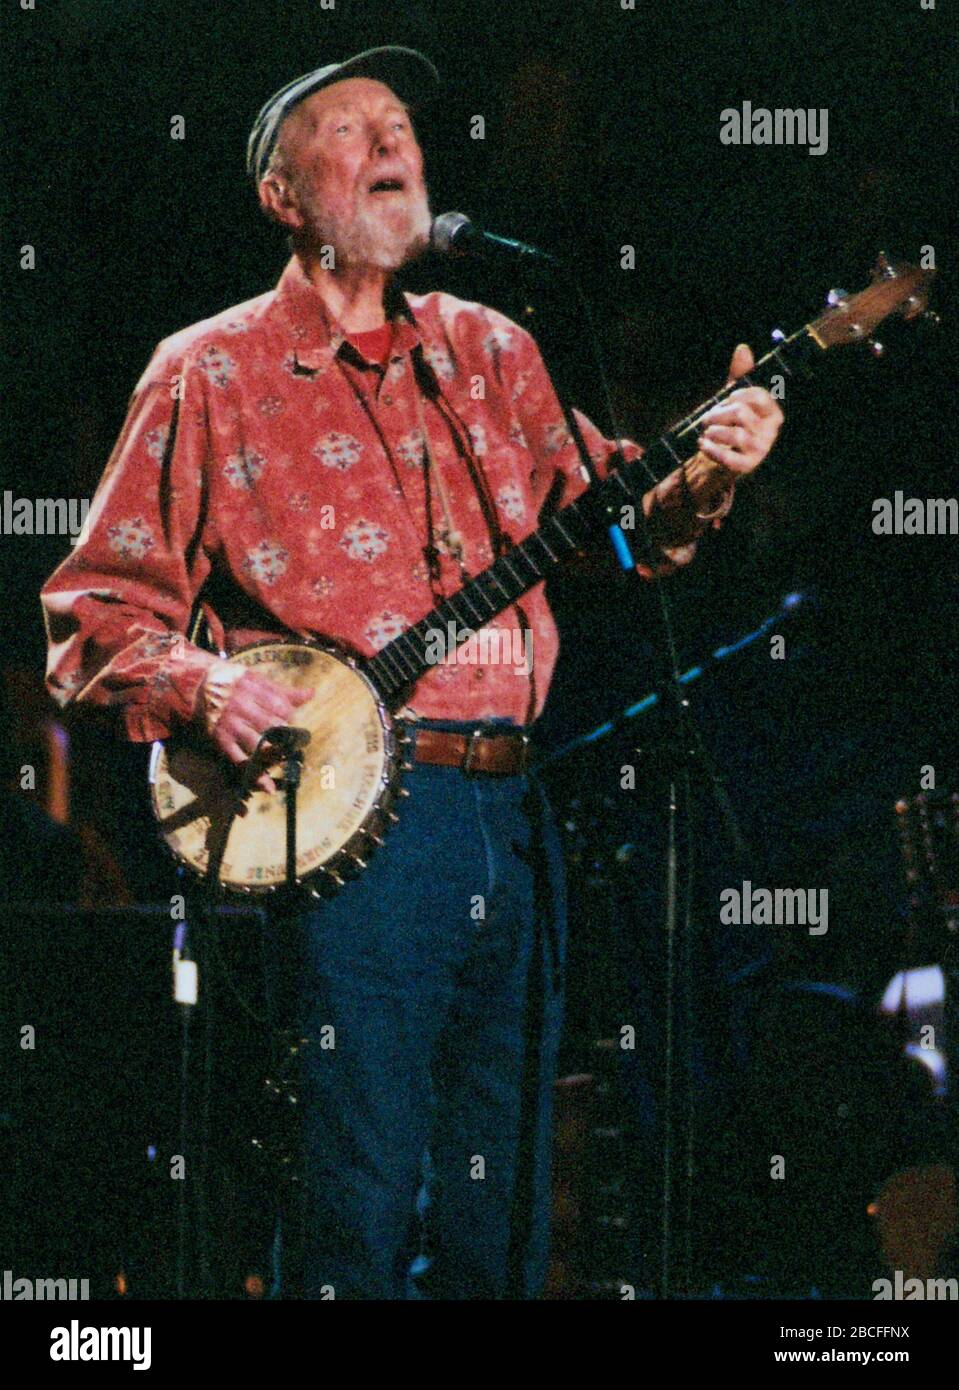 Clearwater Benefit Concert Celebrating Pete Seeger's 90th Birthday at Madison Square Garden , New York 05-03-2009 Photo by Michael Brito PETE SEEGER Stock Photo